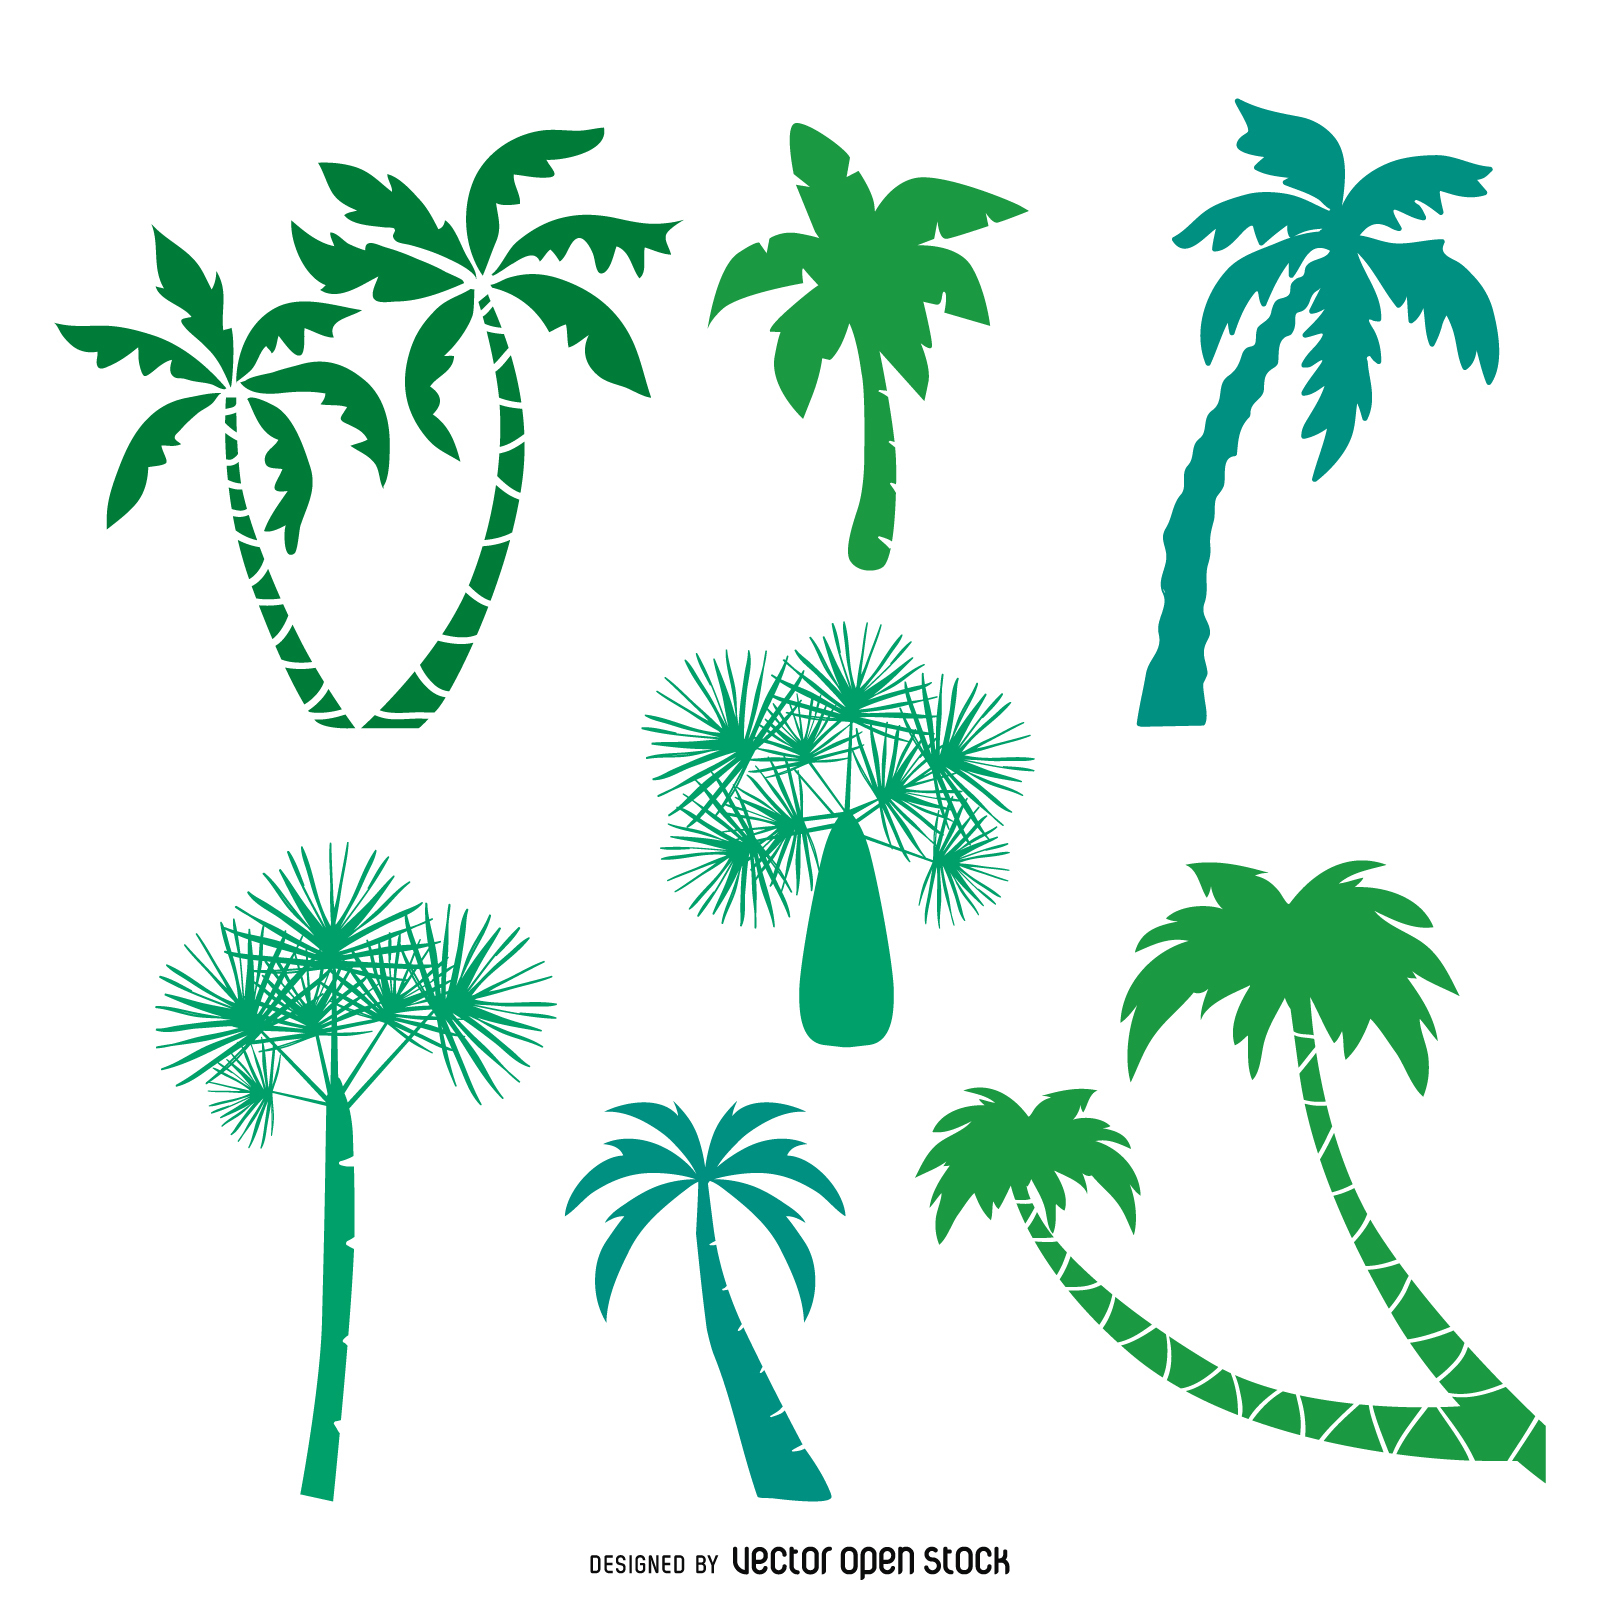 Green palm trees silhouettes pack - Vector download